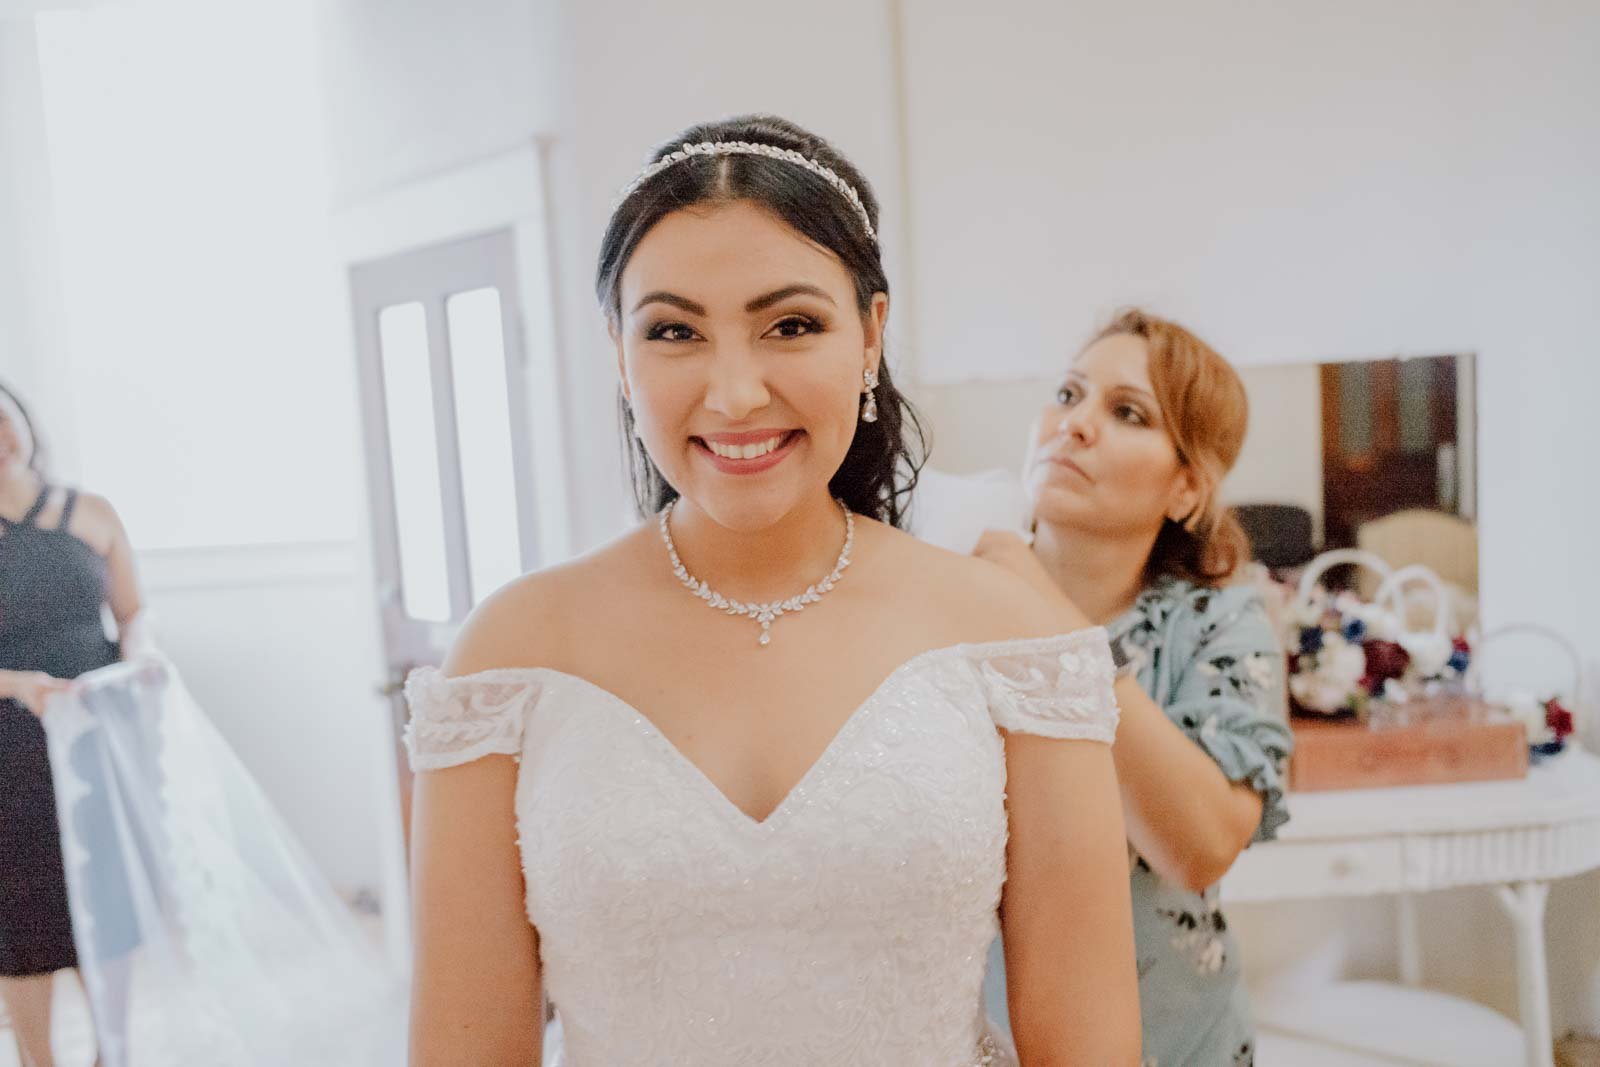 The bride beams with a wide smile at mirrorPhilip Thomas Photography